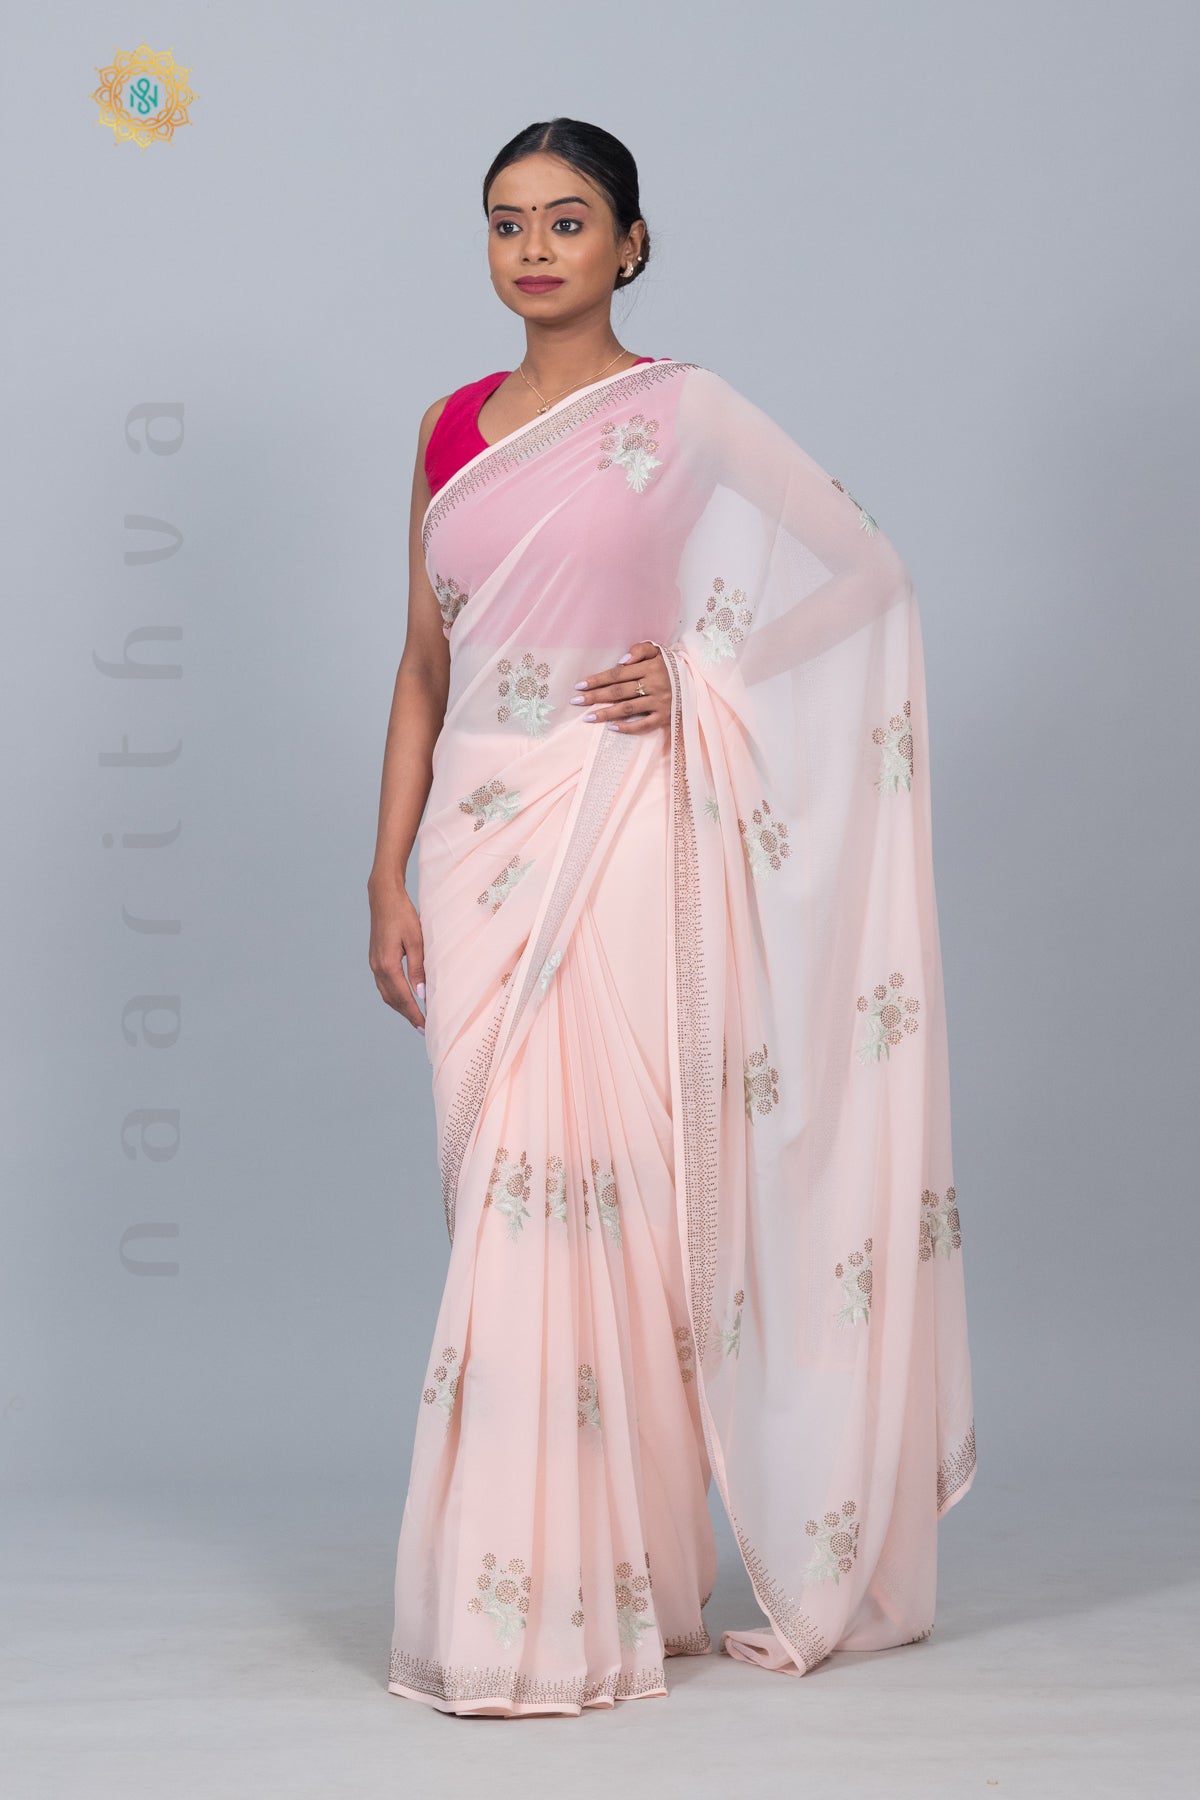 BABY PINK - DESIGNER GEORGETTE SAREE WITH STONE WORK & EMBROIDERY